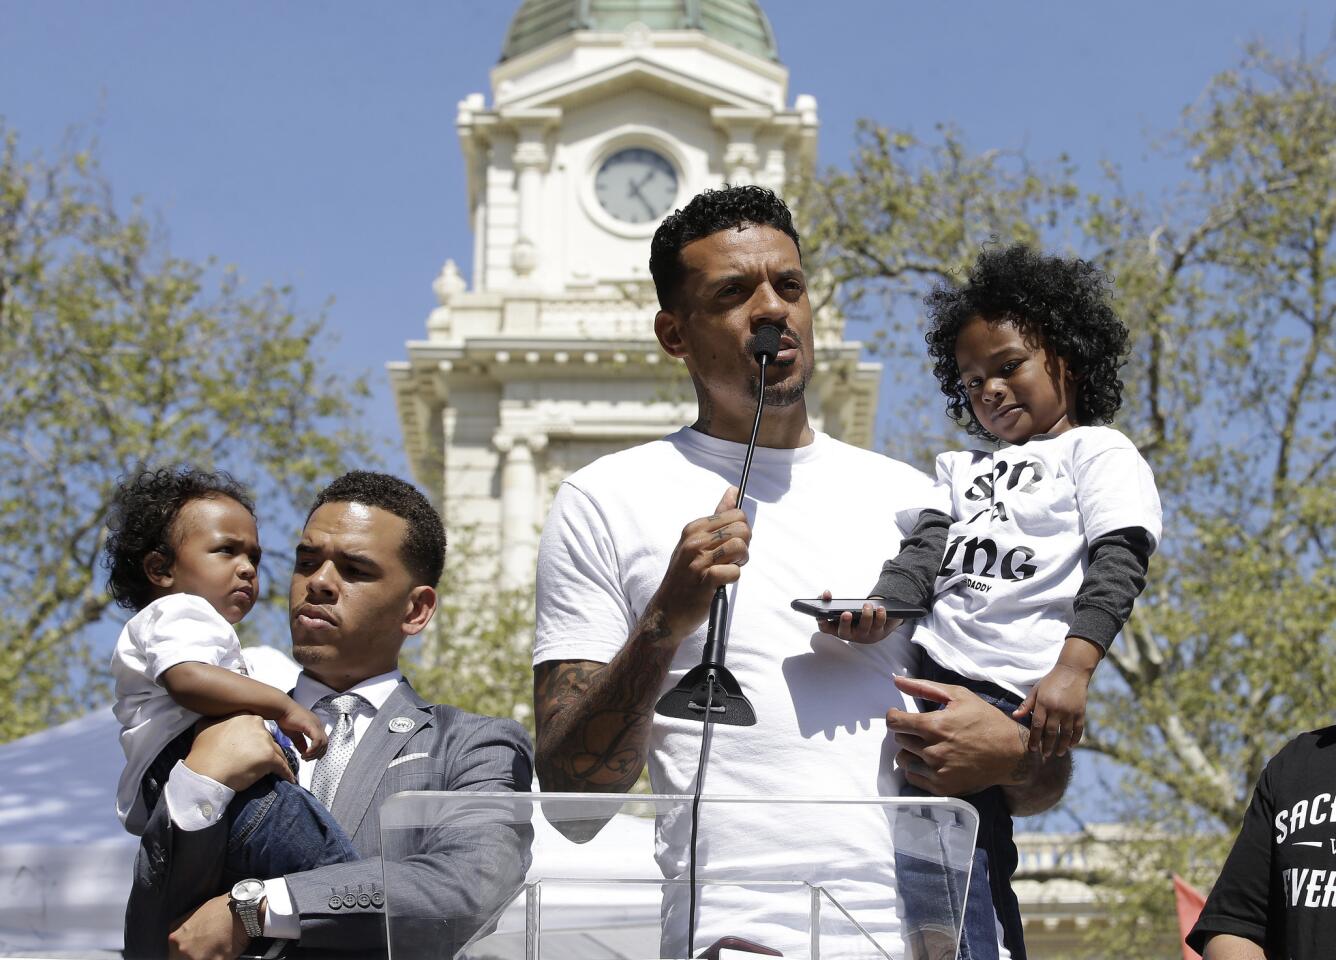 Former NBA player Matt Barnes holds Cairo, one of the sons of police shooting victim Stephon Clark, as he speaks at a rally aimed at ensuring Clark's memory and calling for police reform, Saturday, March 31, 2018, in Sacramento, Calif.